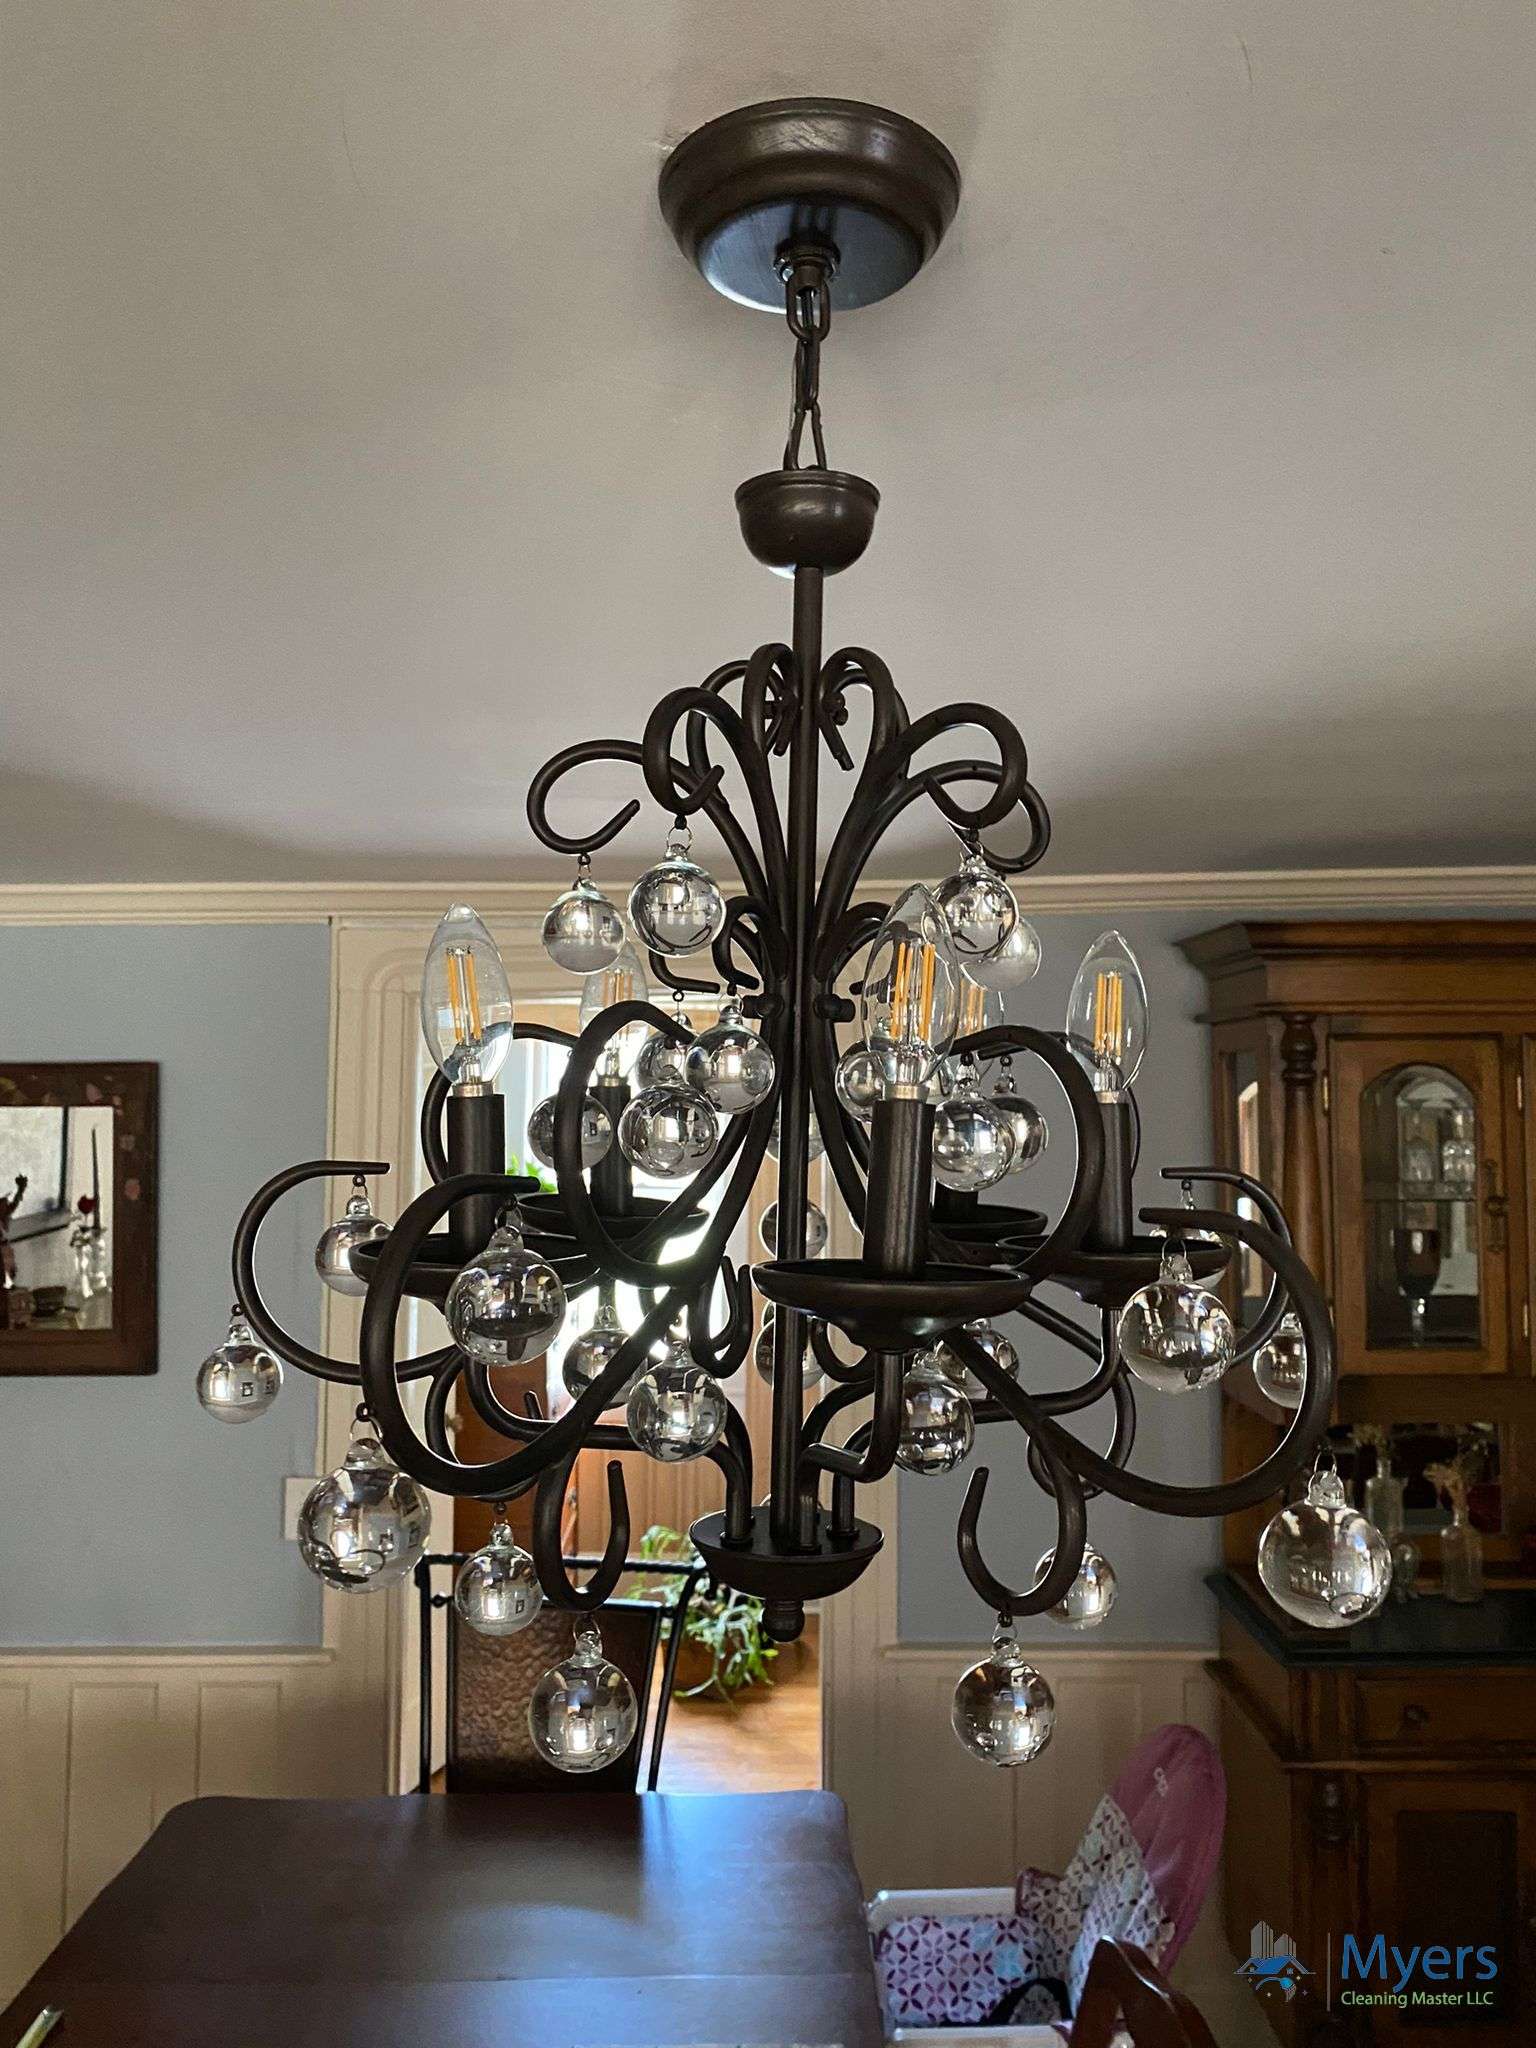 Residential chandelier cleaners in connecticut